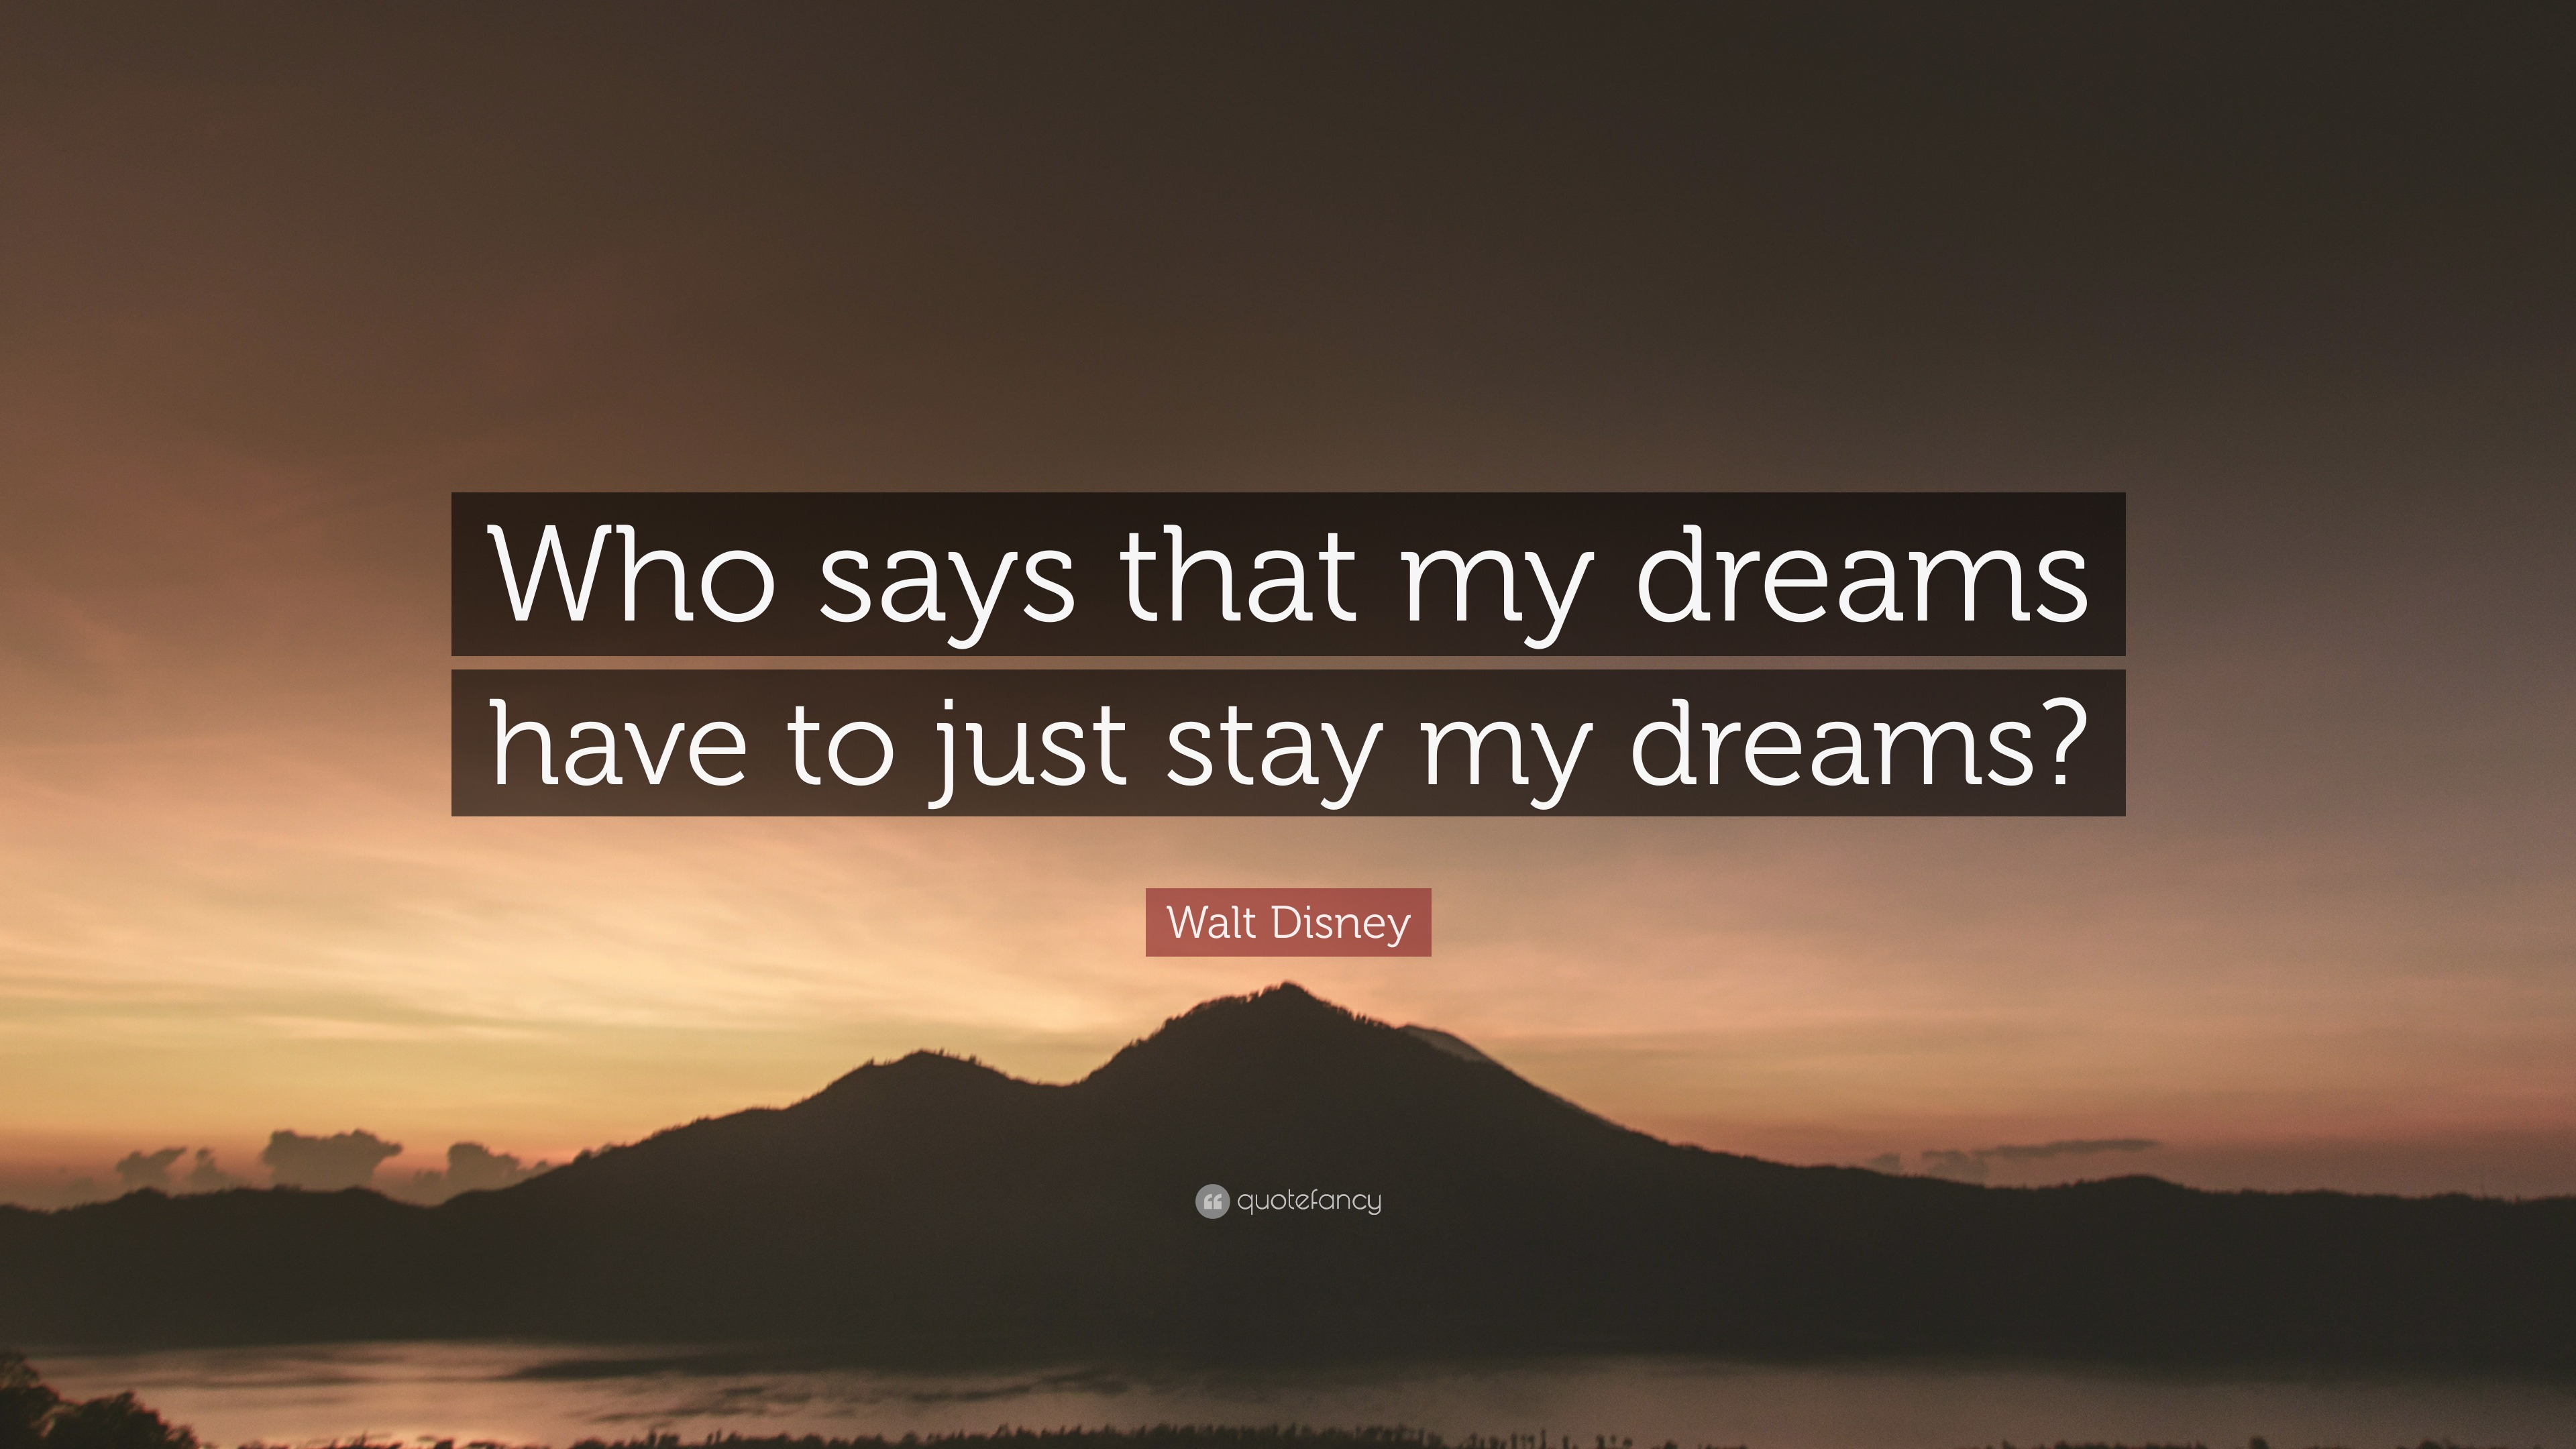 Walt Disney Quote: “Who says that my dreams have to just stay my dreams?”